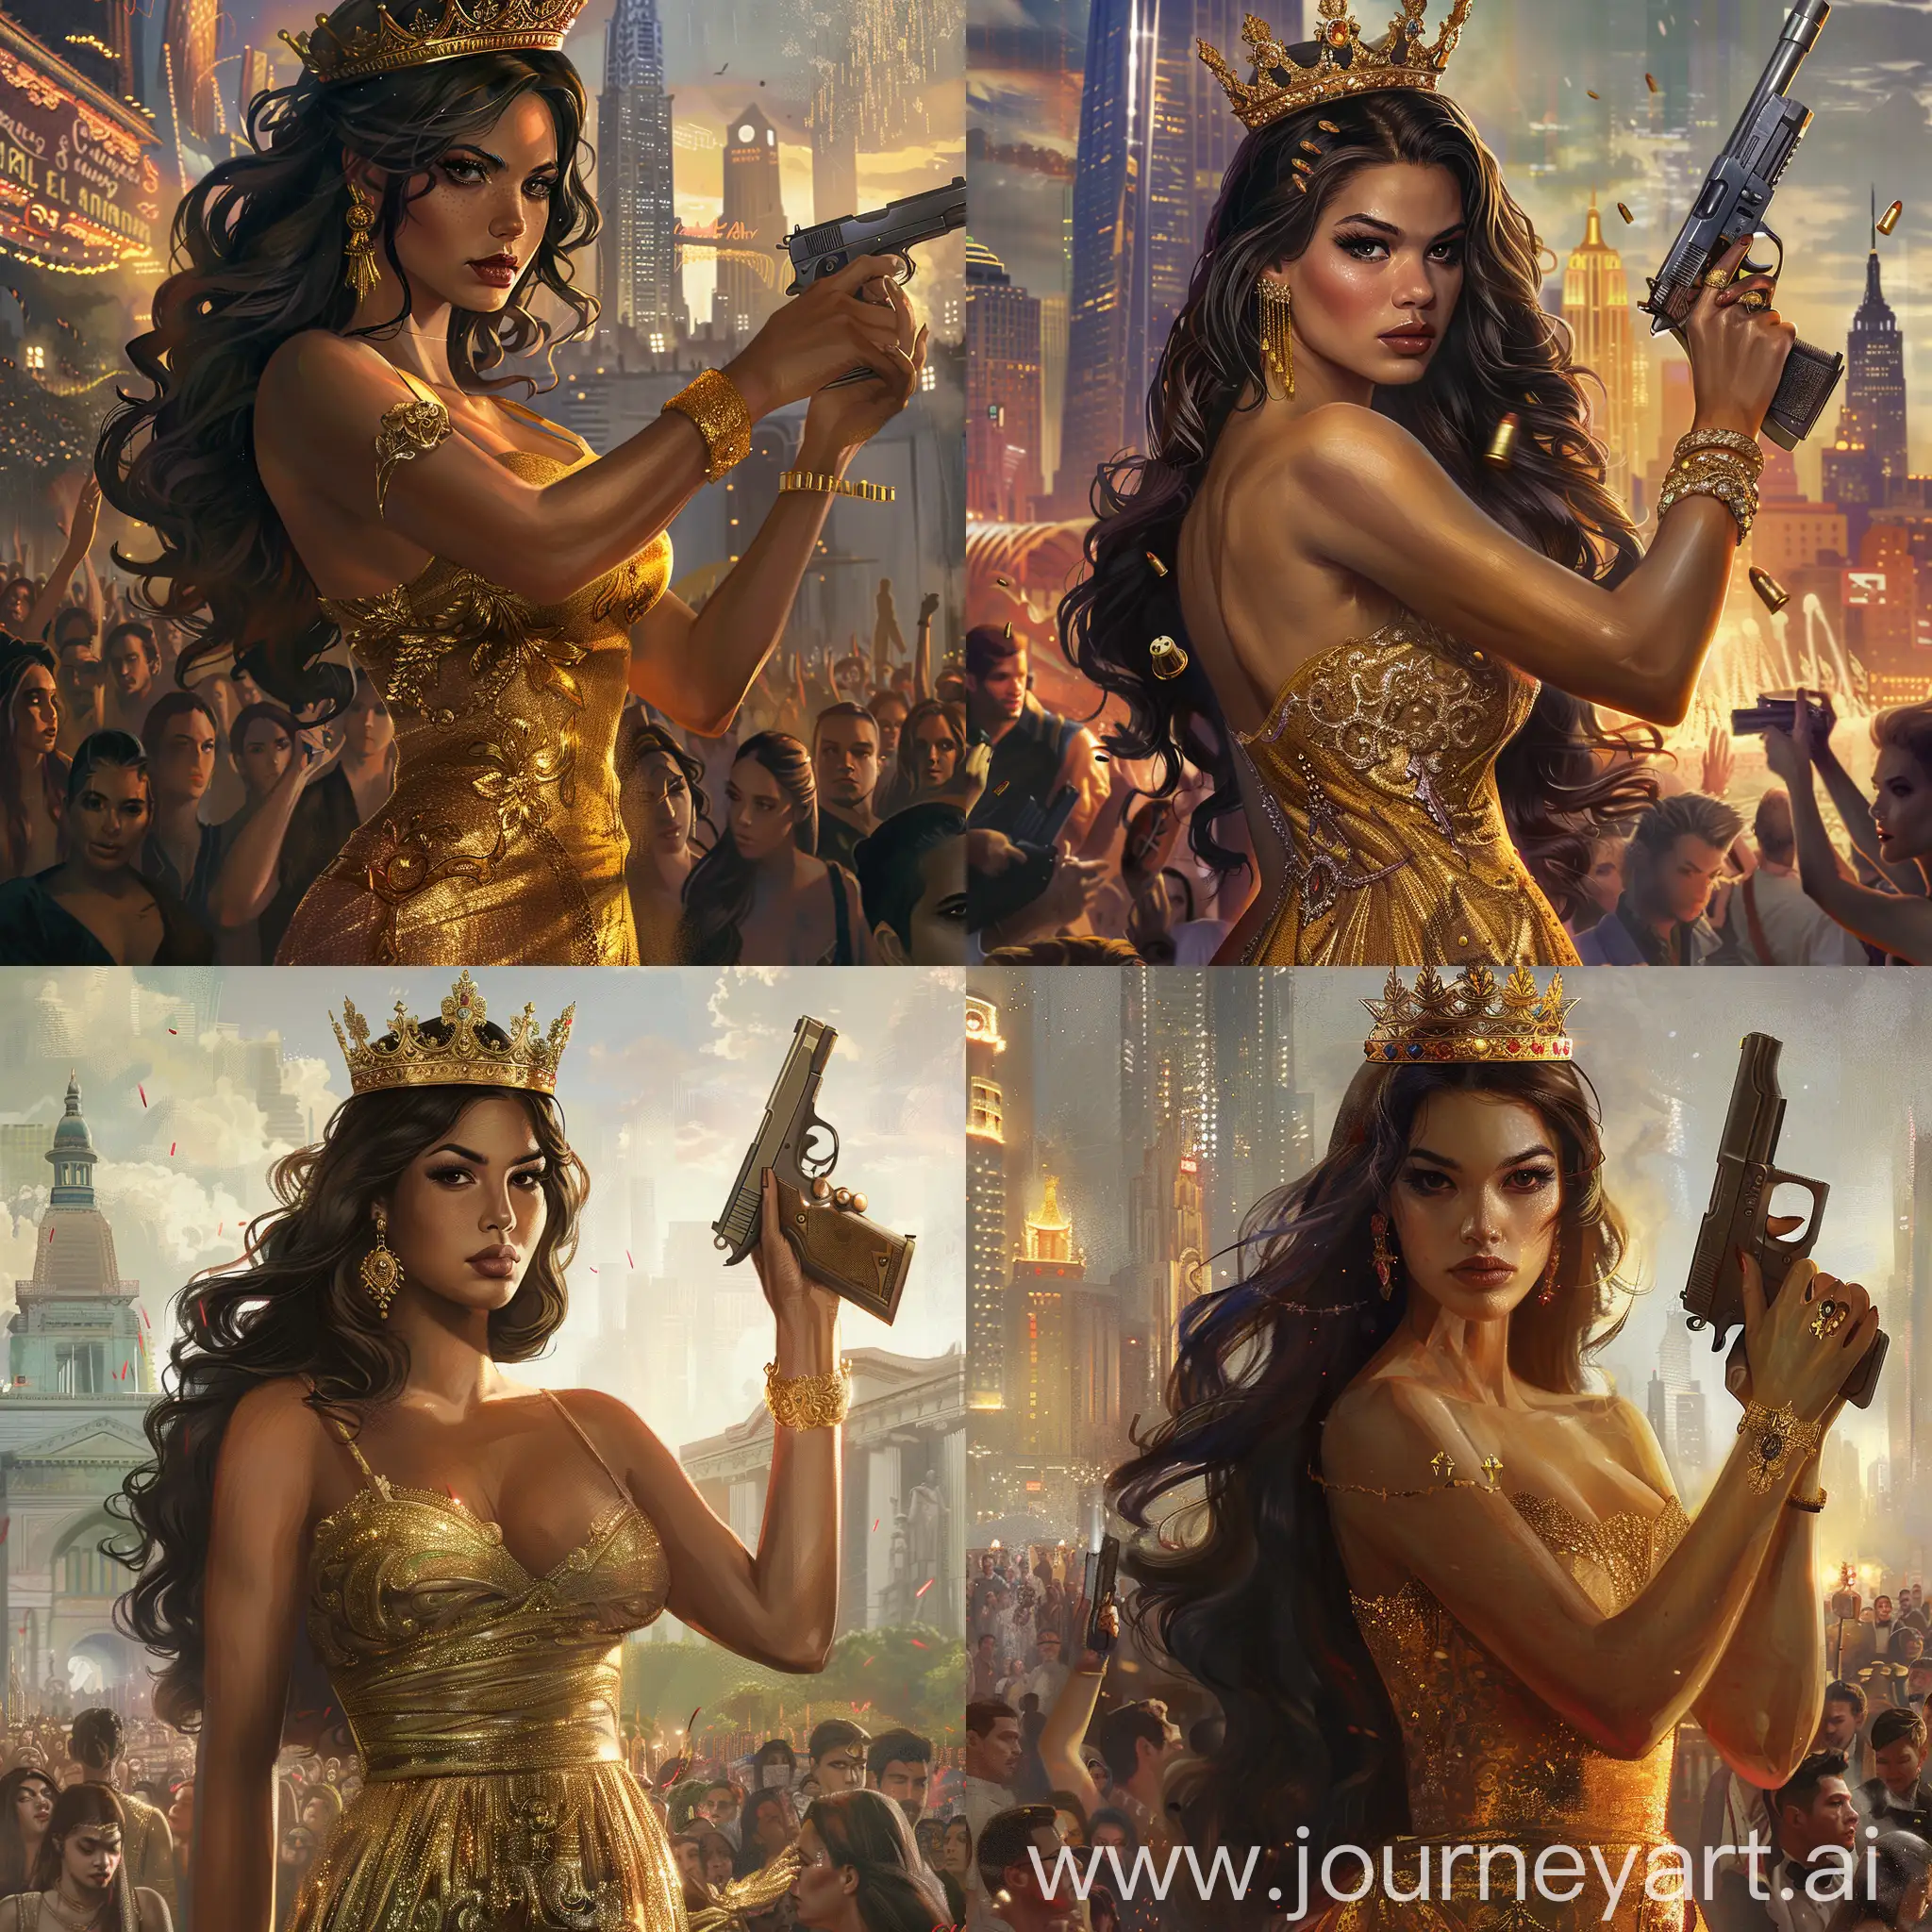 A woman wearing a crown and gold dress holds a gun. She has long, dark hair and is wearing a gold bracelet and earring. She stands in front of a crowd and a city skyline.